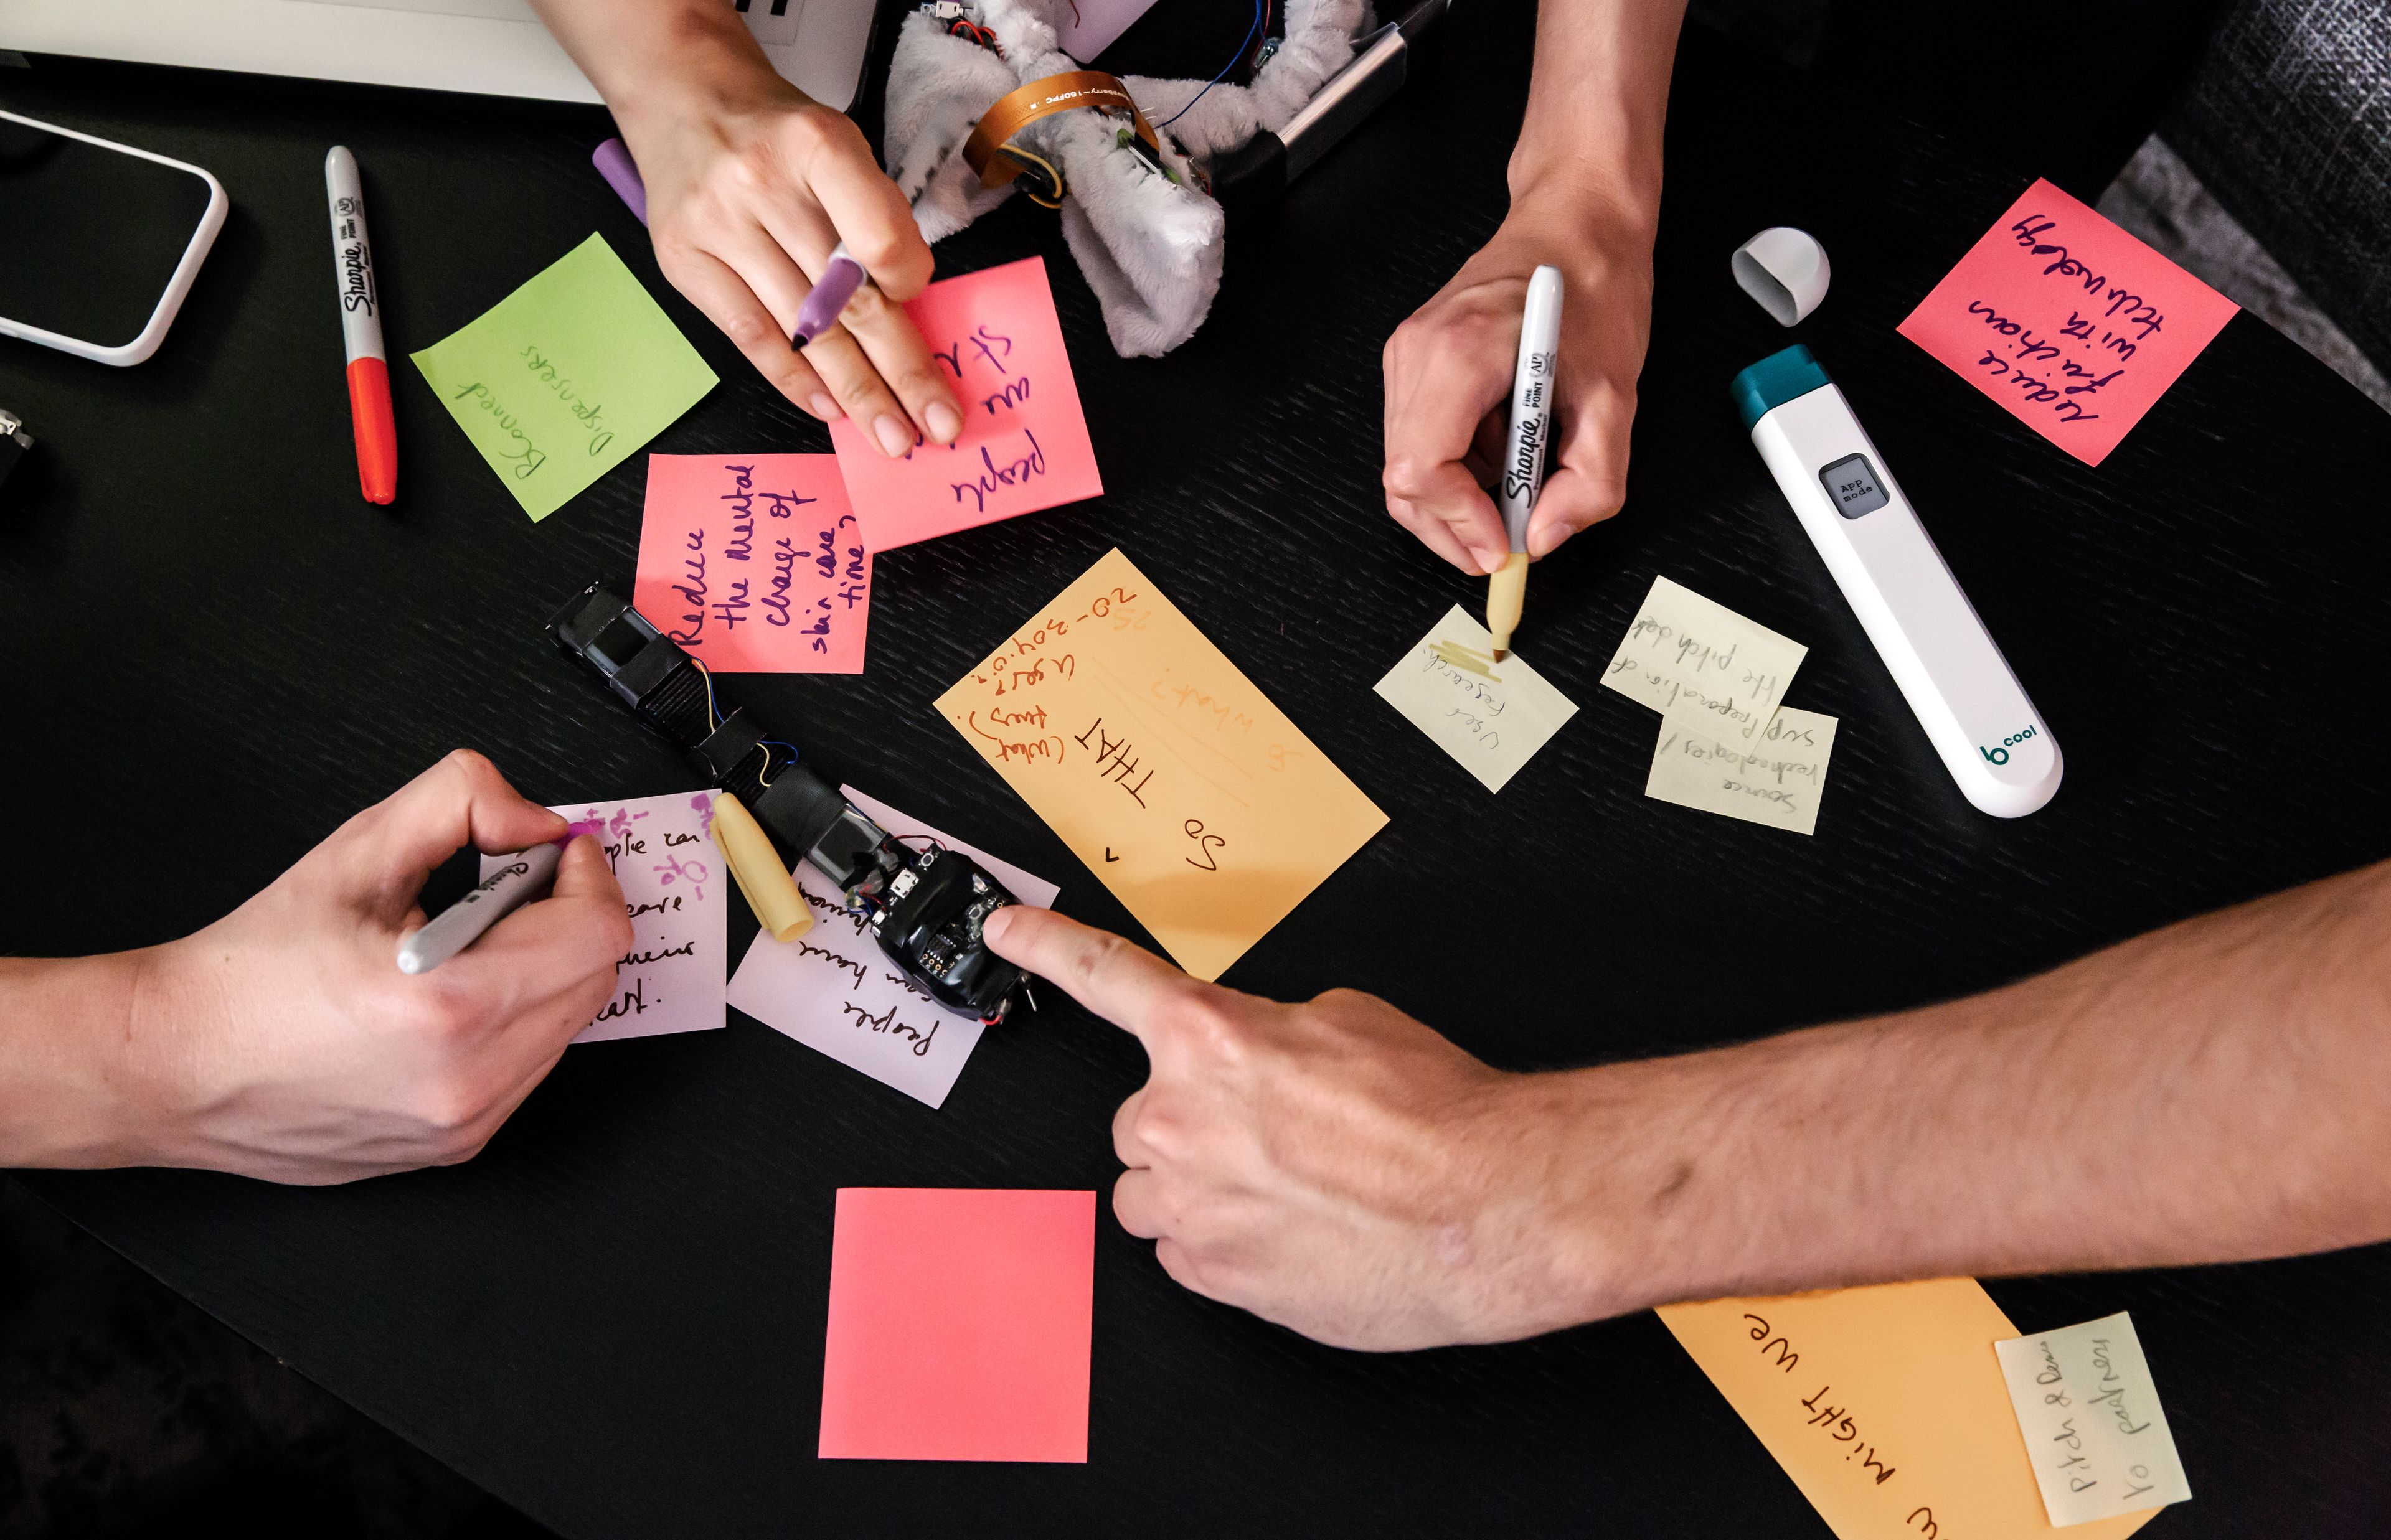 Product designers and innovators during a Design Thinking workshop